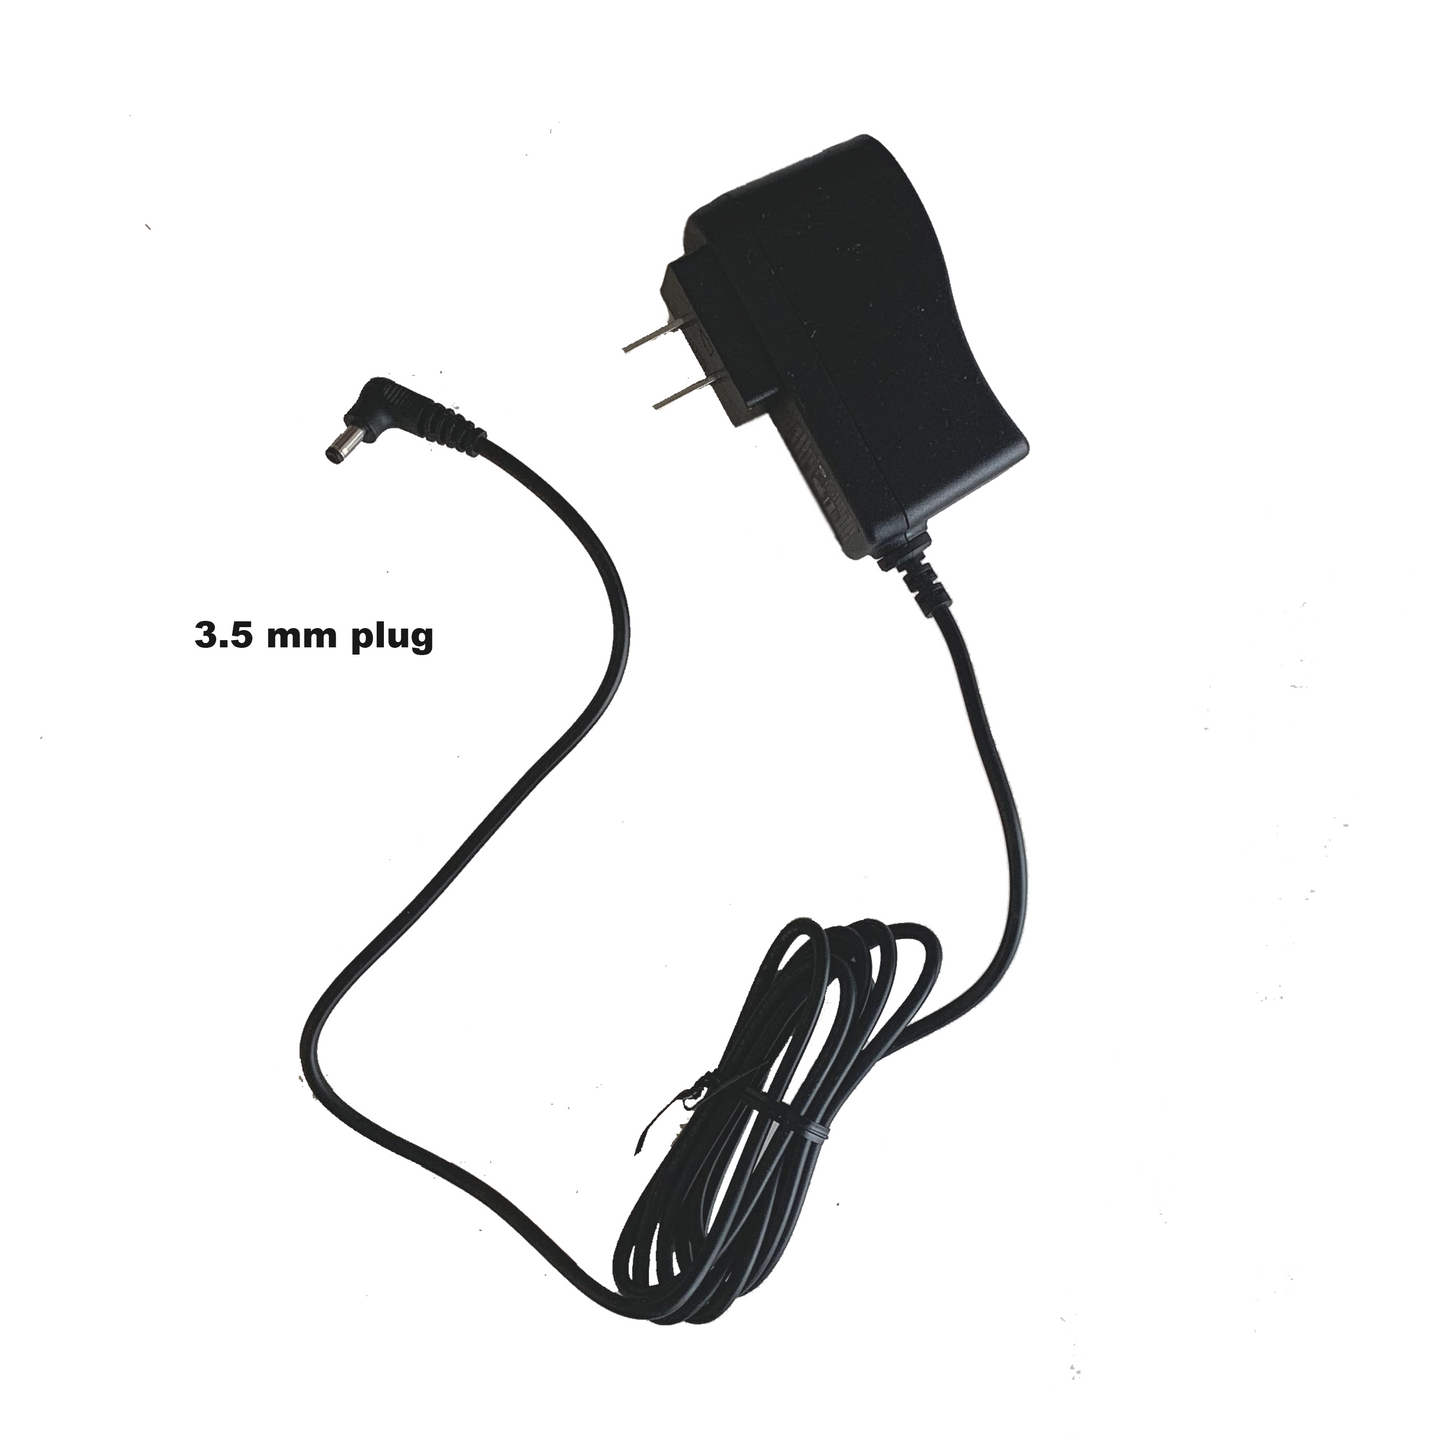 Avita Magus Original AC Charger for Windows Tablets (Buy 2 or more get 30% discount)